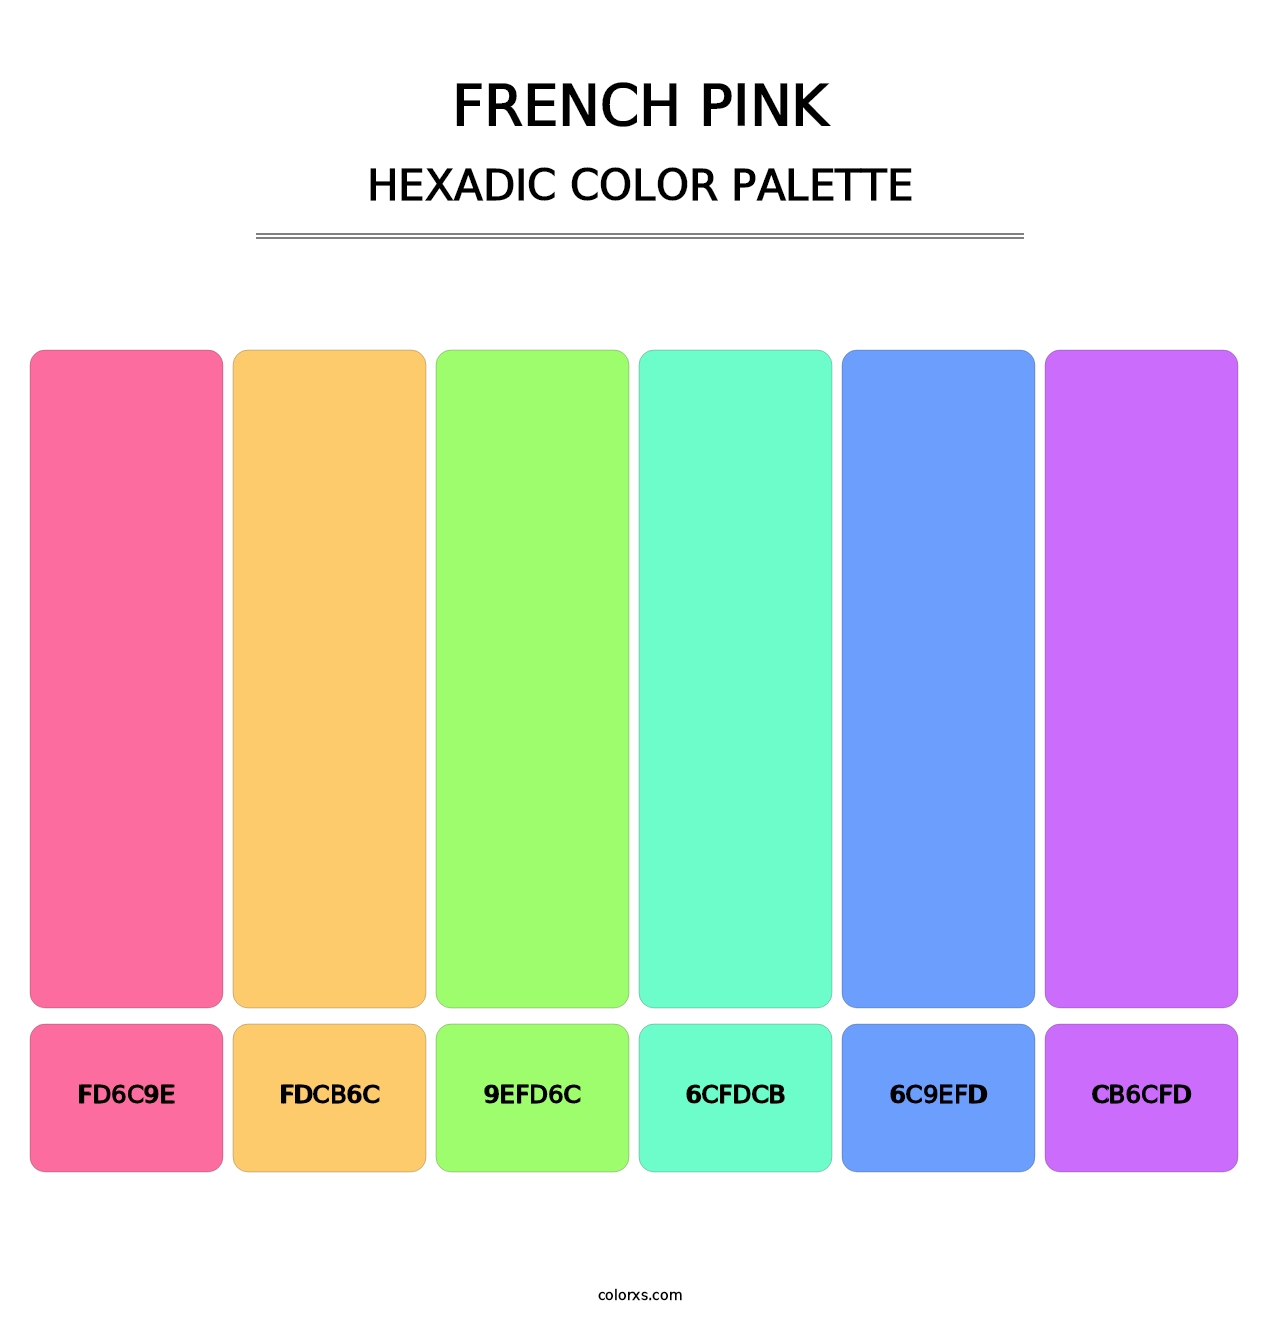 French Pink - Hexadic Color Palette